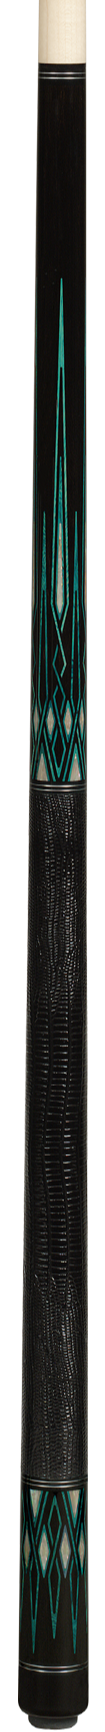 Pechauer Pechauer PL-34 Limited Edition Pool Cue Pool Cue